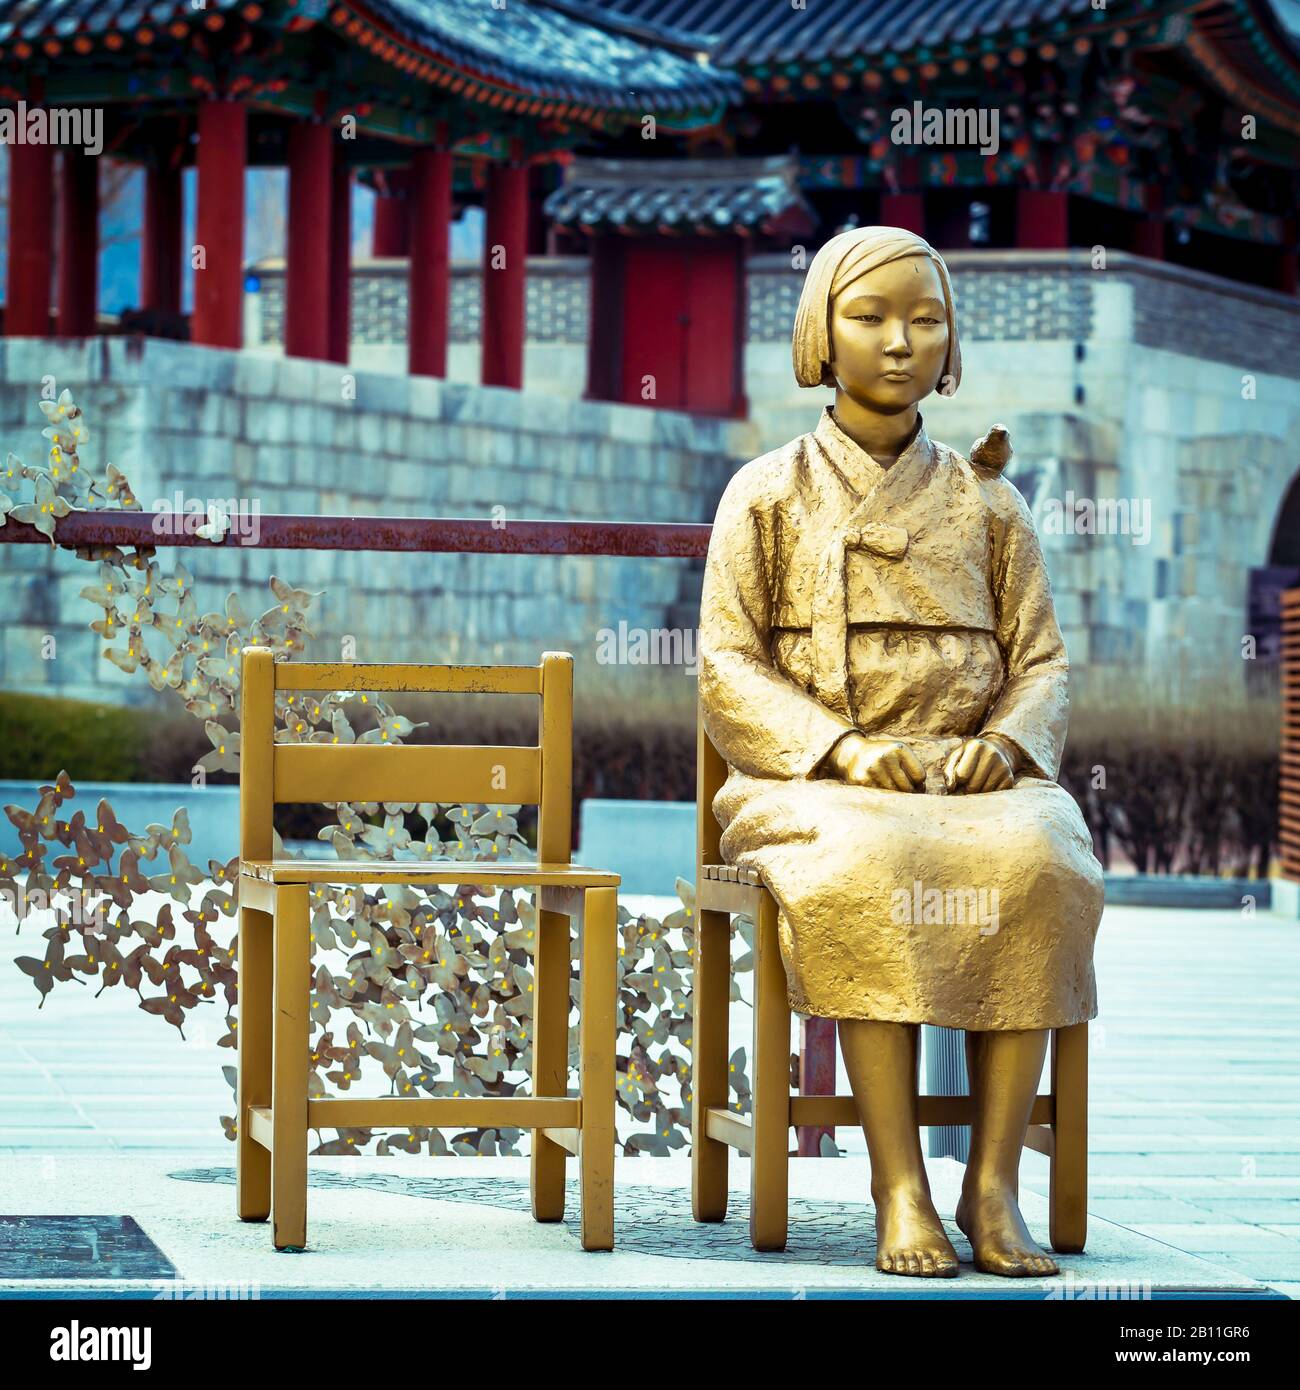 This statue is locate in a plaza just beside Pungnammun Gate, Nambu Market, and across Jeonju. Stock Photo